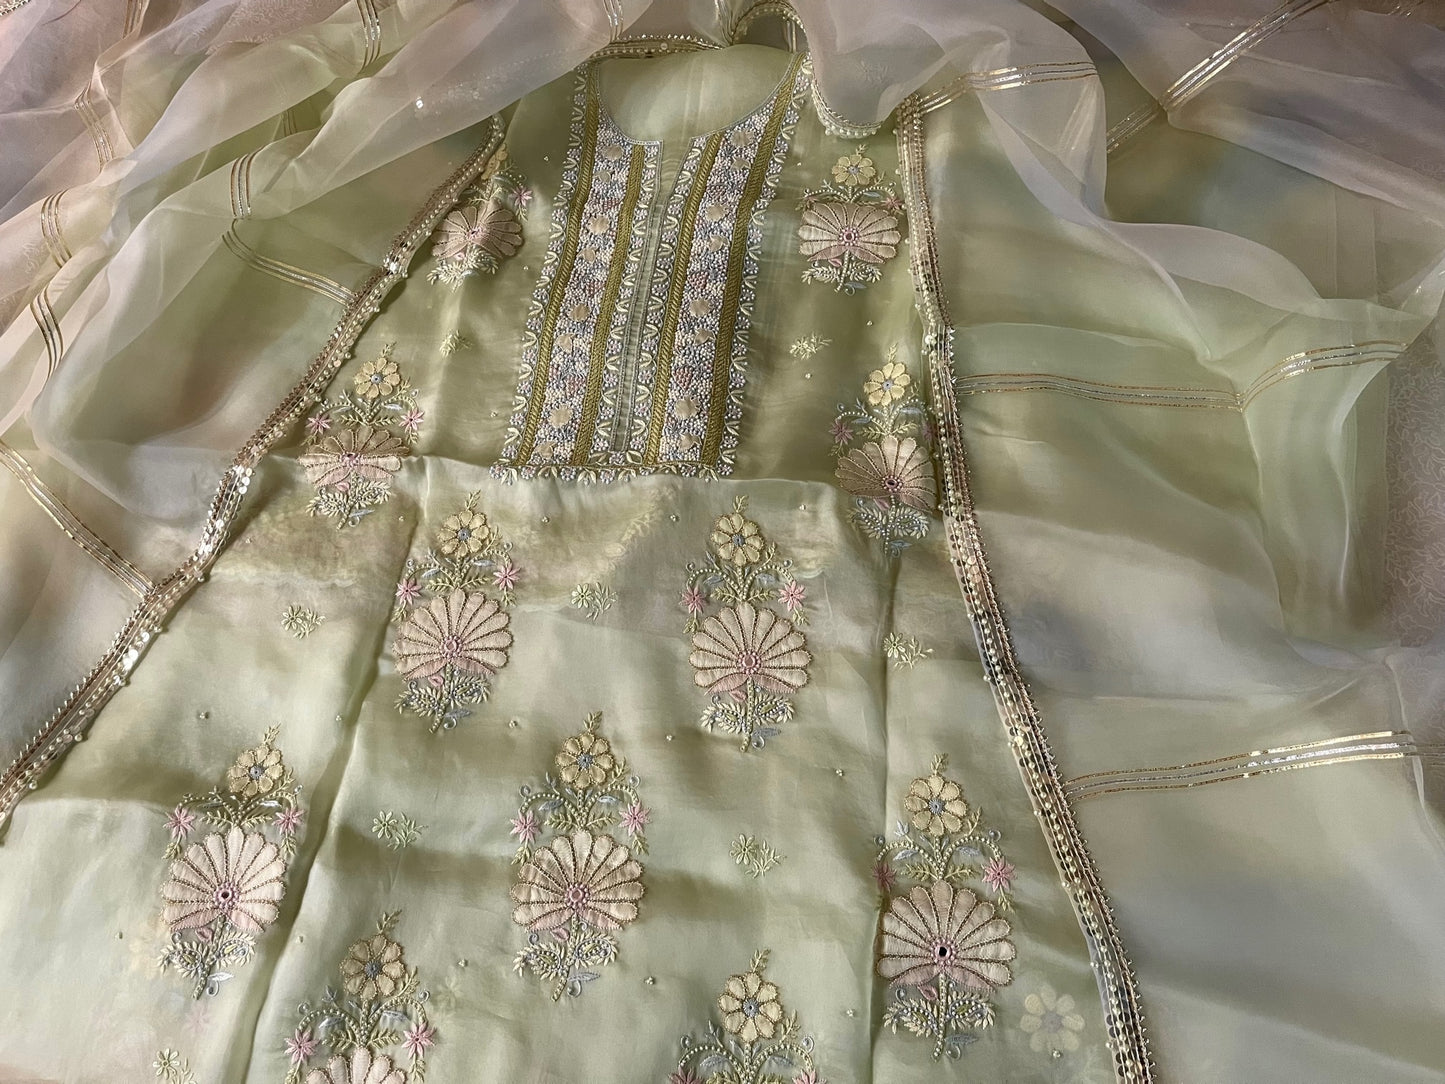 PISTA GREEN COLOUR PURE ORGANZA HAND EMBROIDERED UNSTITCHED SUIT EMBELLISHED WITH CUTDANA, PEARL & SHADOW EMBROIDERY